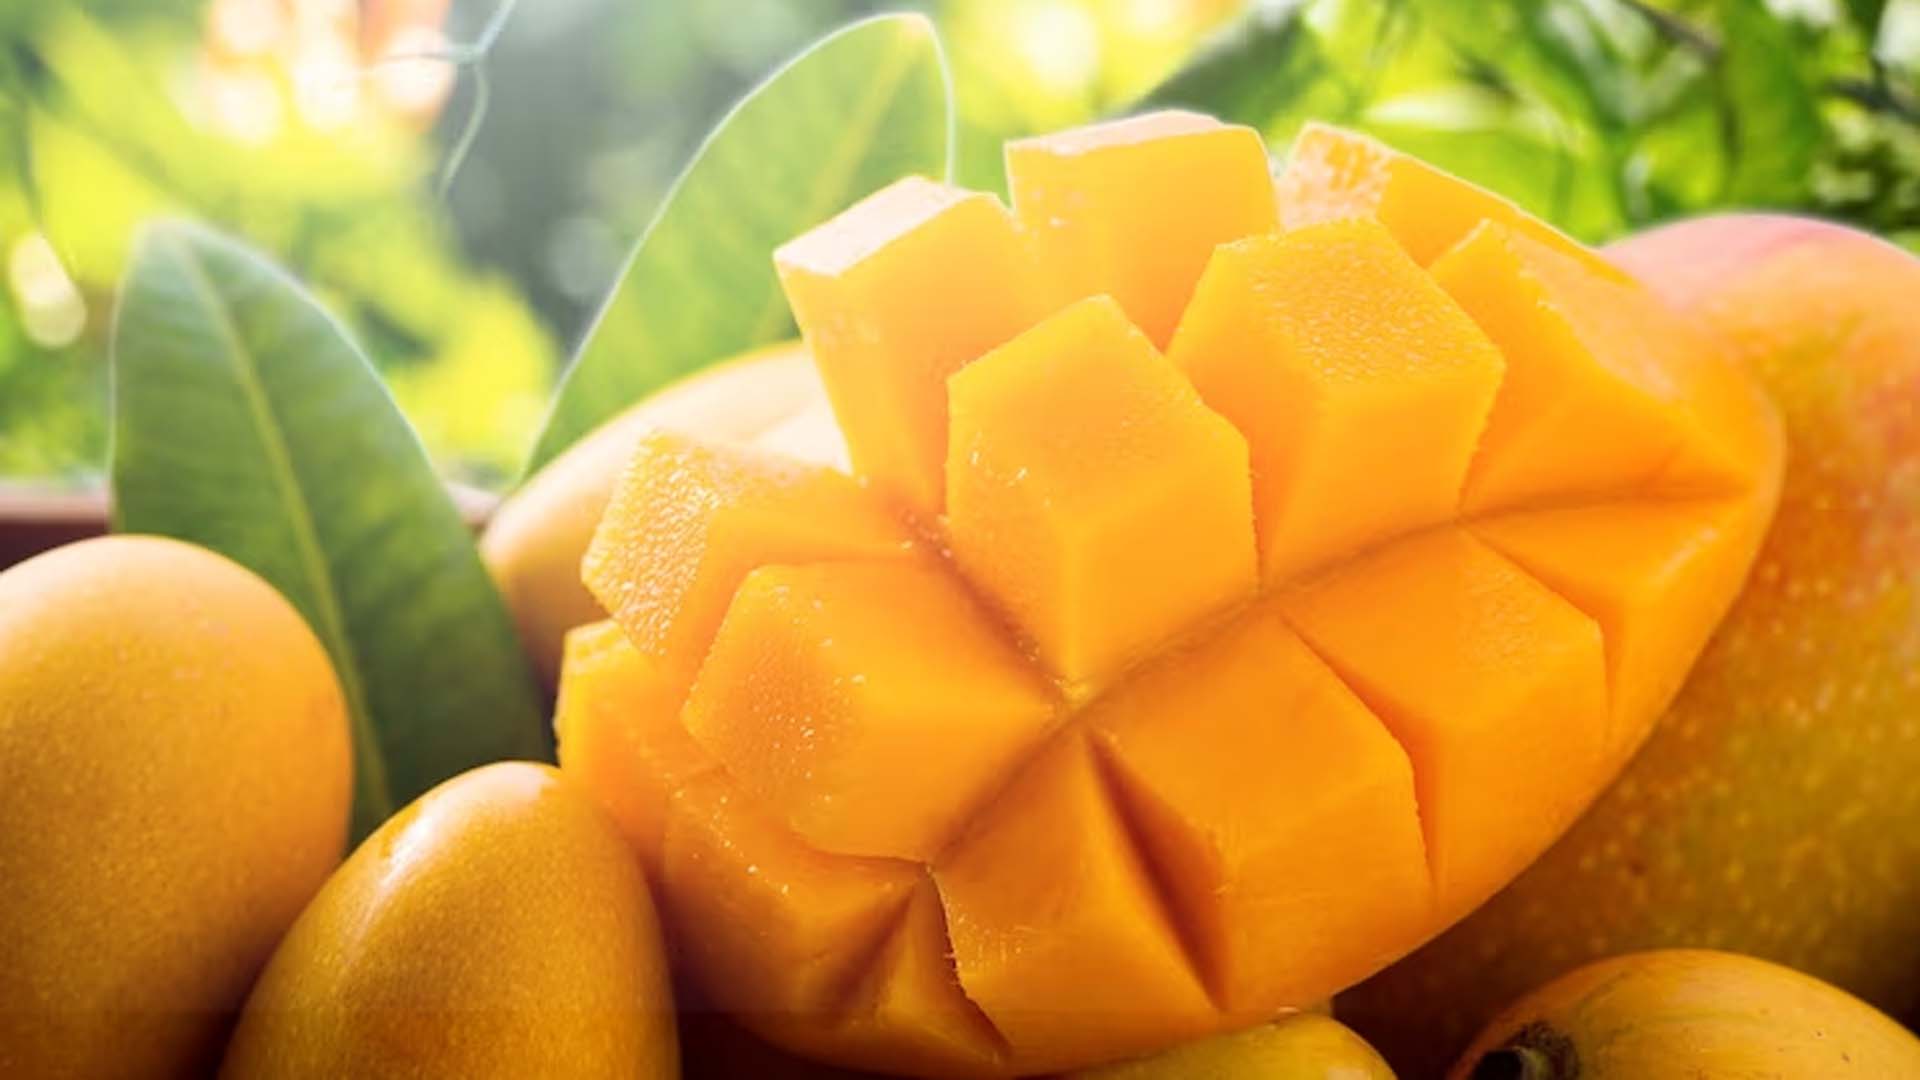 Does Eating Mangoes Cause Pimples?